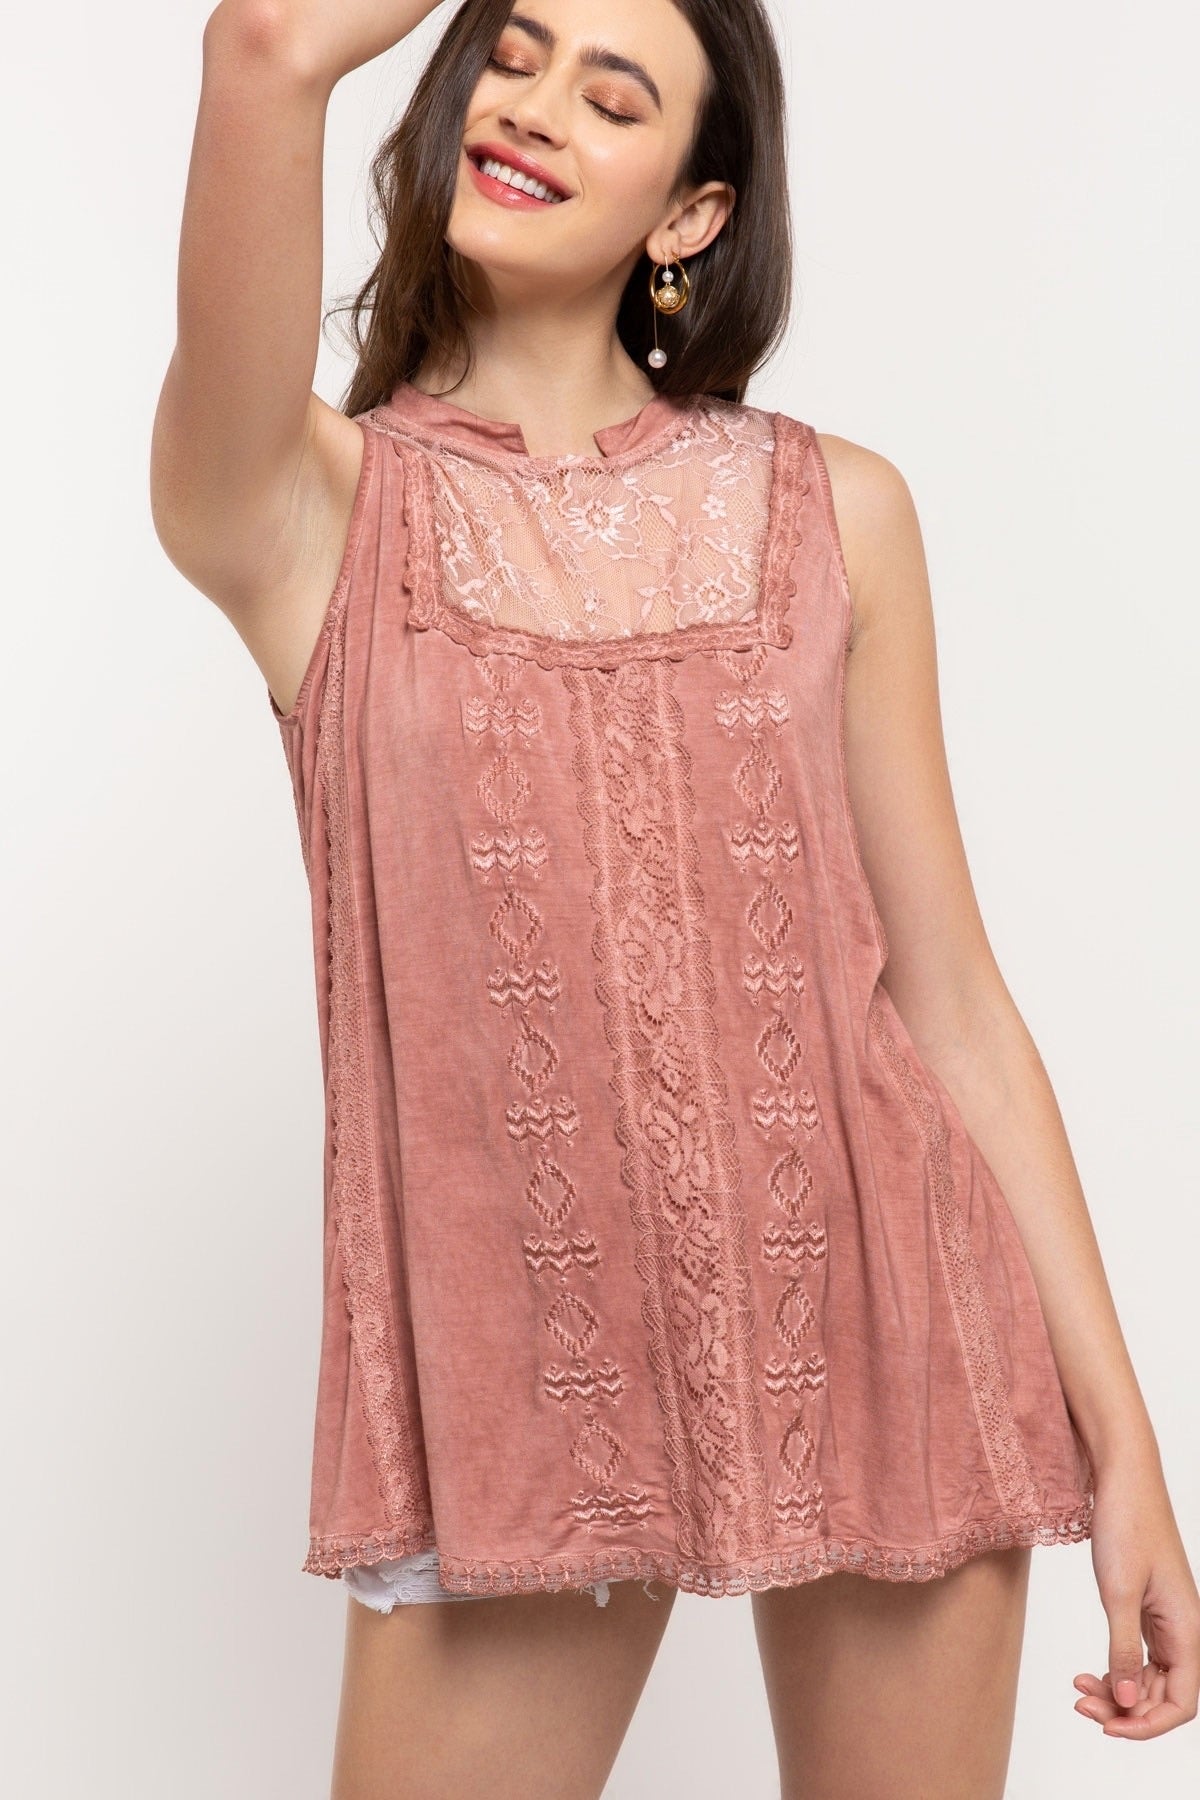 Suncatcher Mock-Neck Embroidered + Lace Sleeveless Rayon Jersey Top